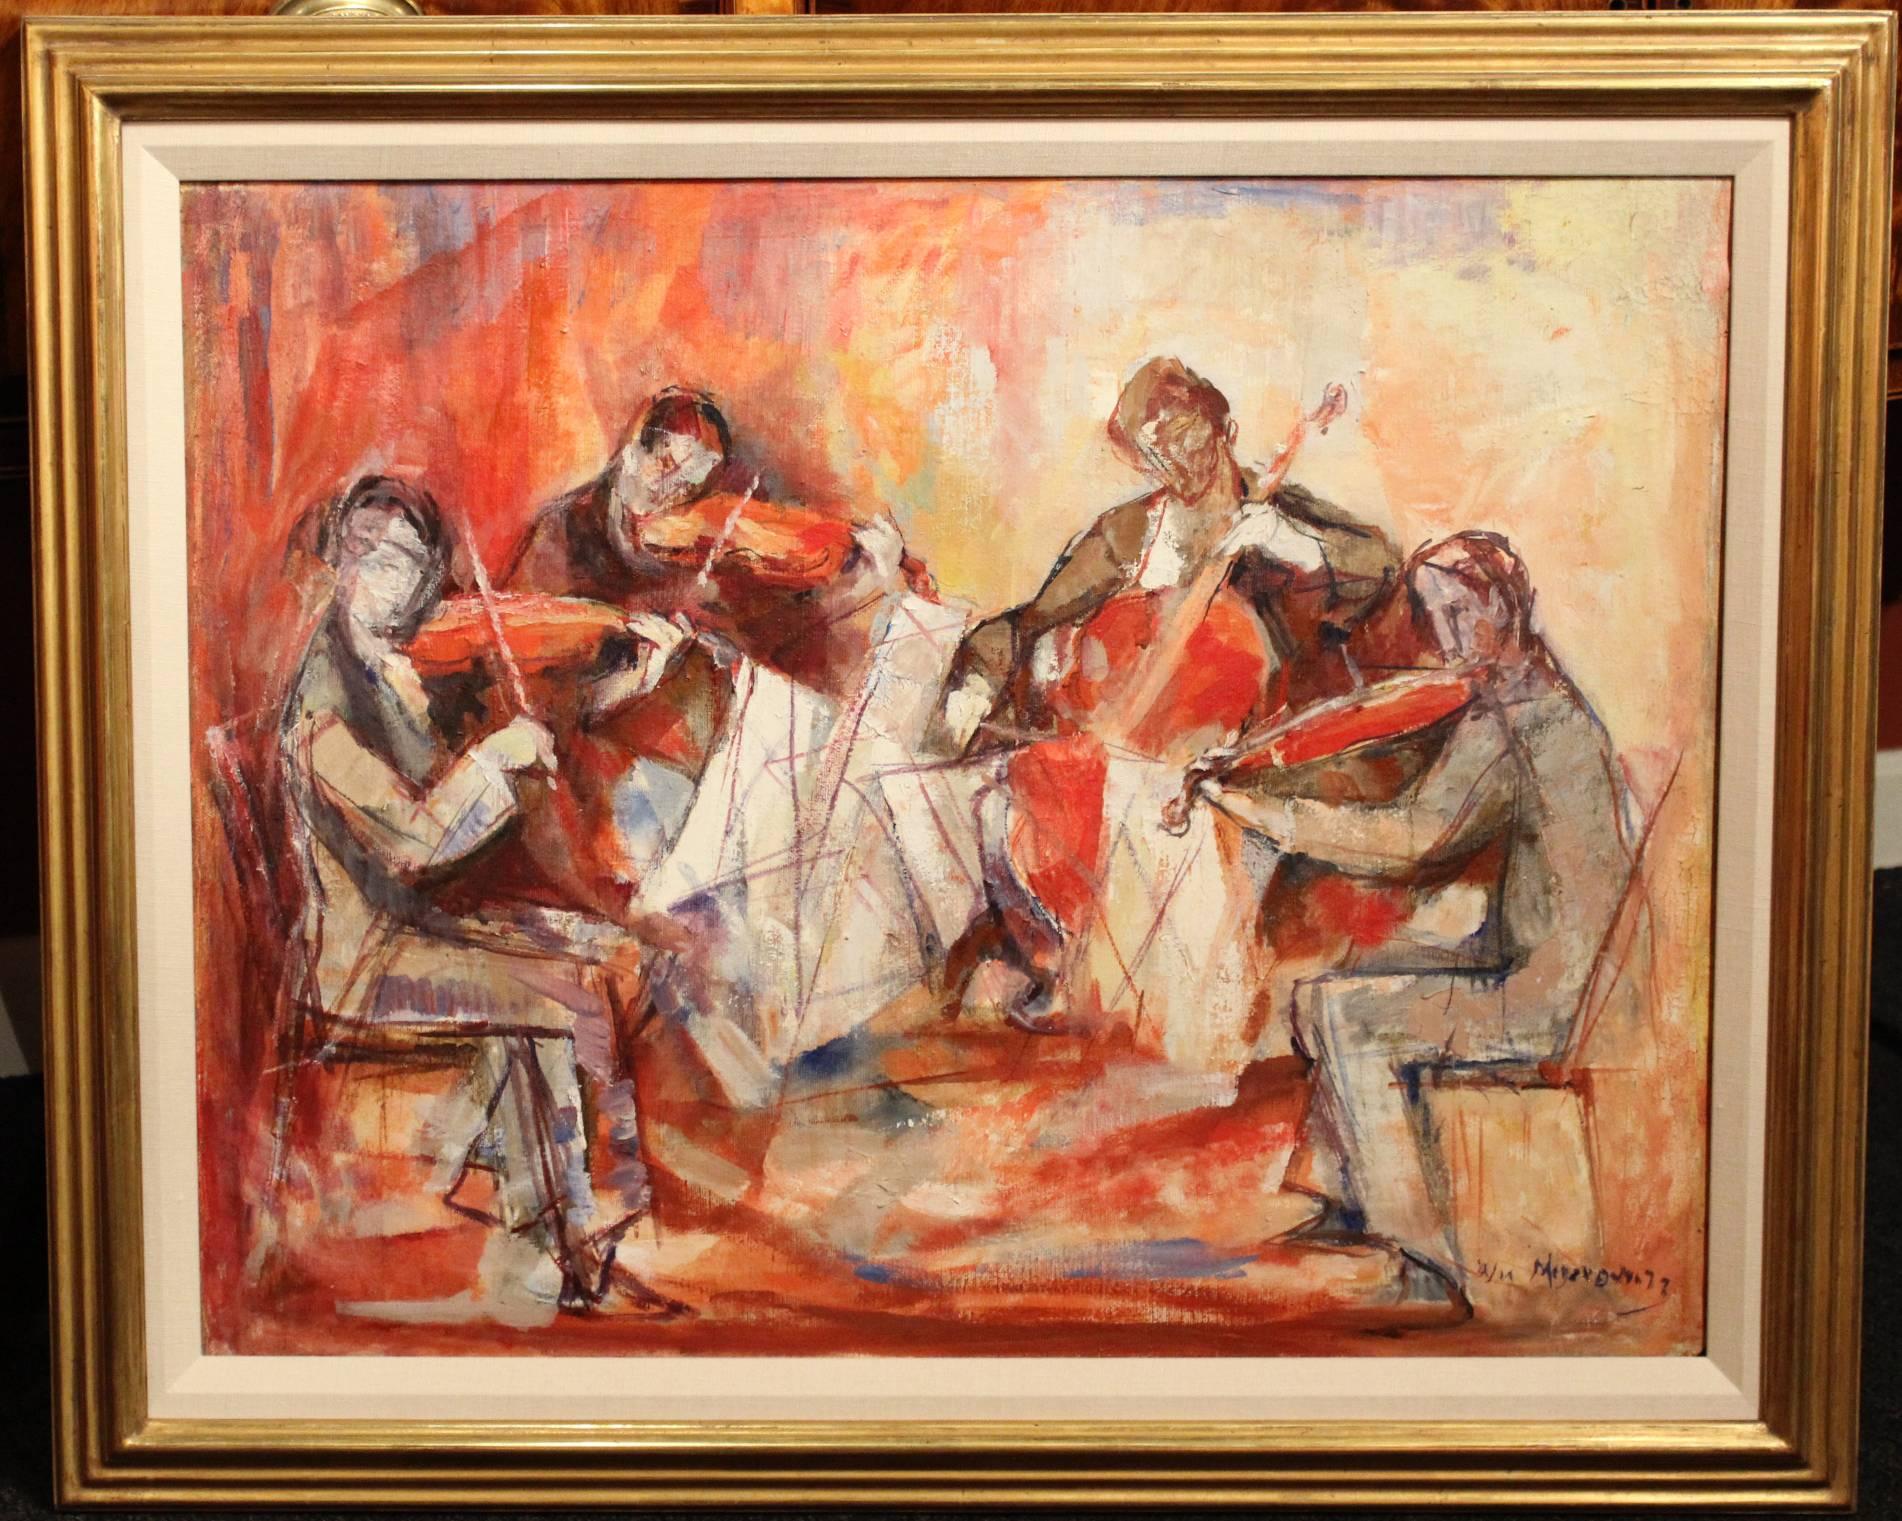 This modernist painting of a musical string quartet, including violins and a cello, was painted by Russian/ American artist William Meyerowitz (1887-1981). Meyerowitz was born in Esterinoslav, Ukraine and later moved to America, studying and working